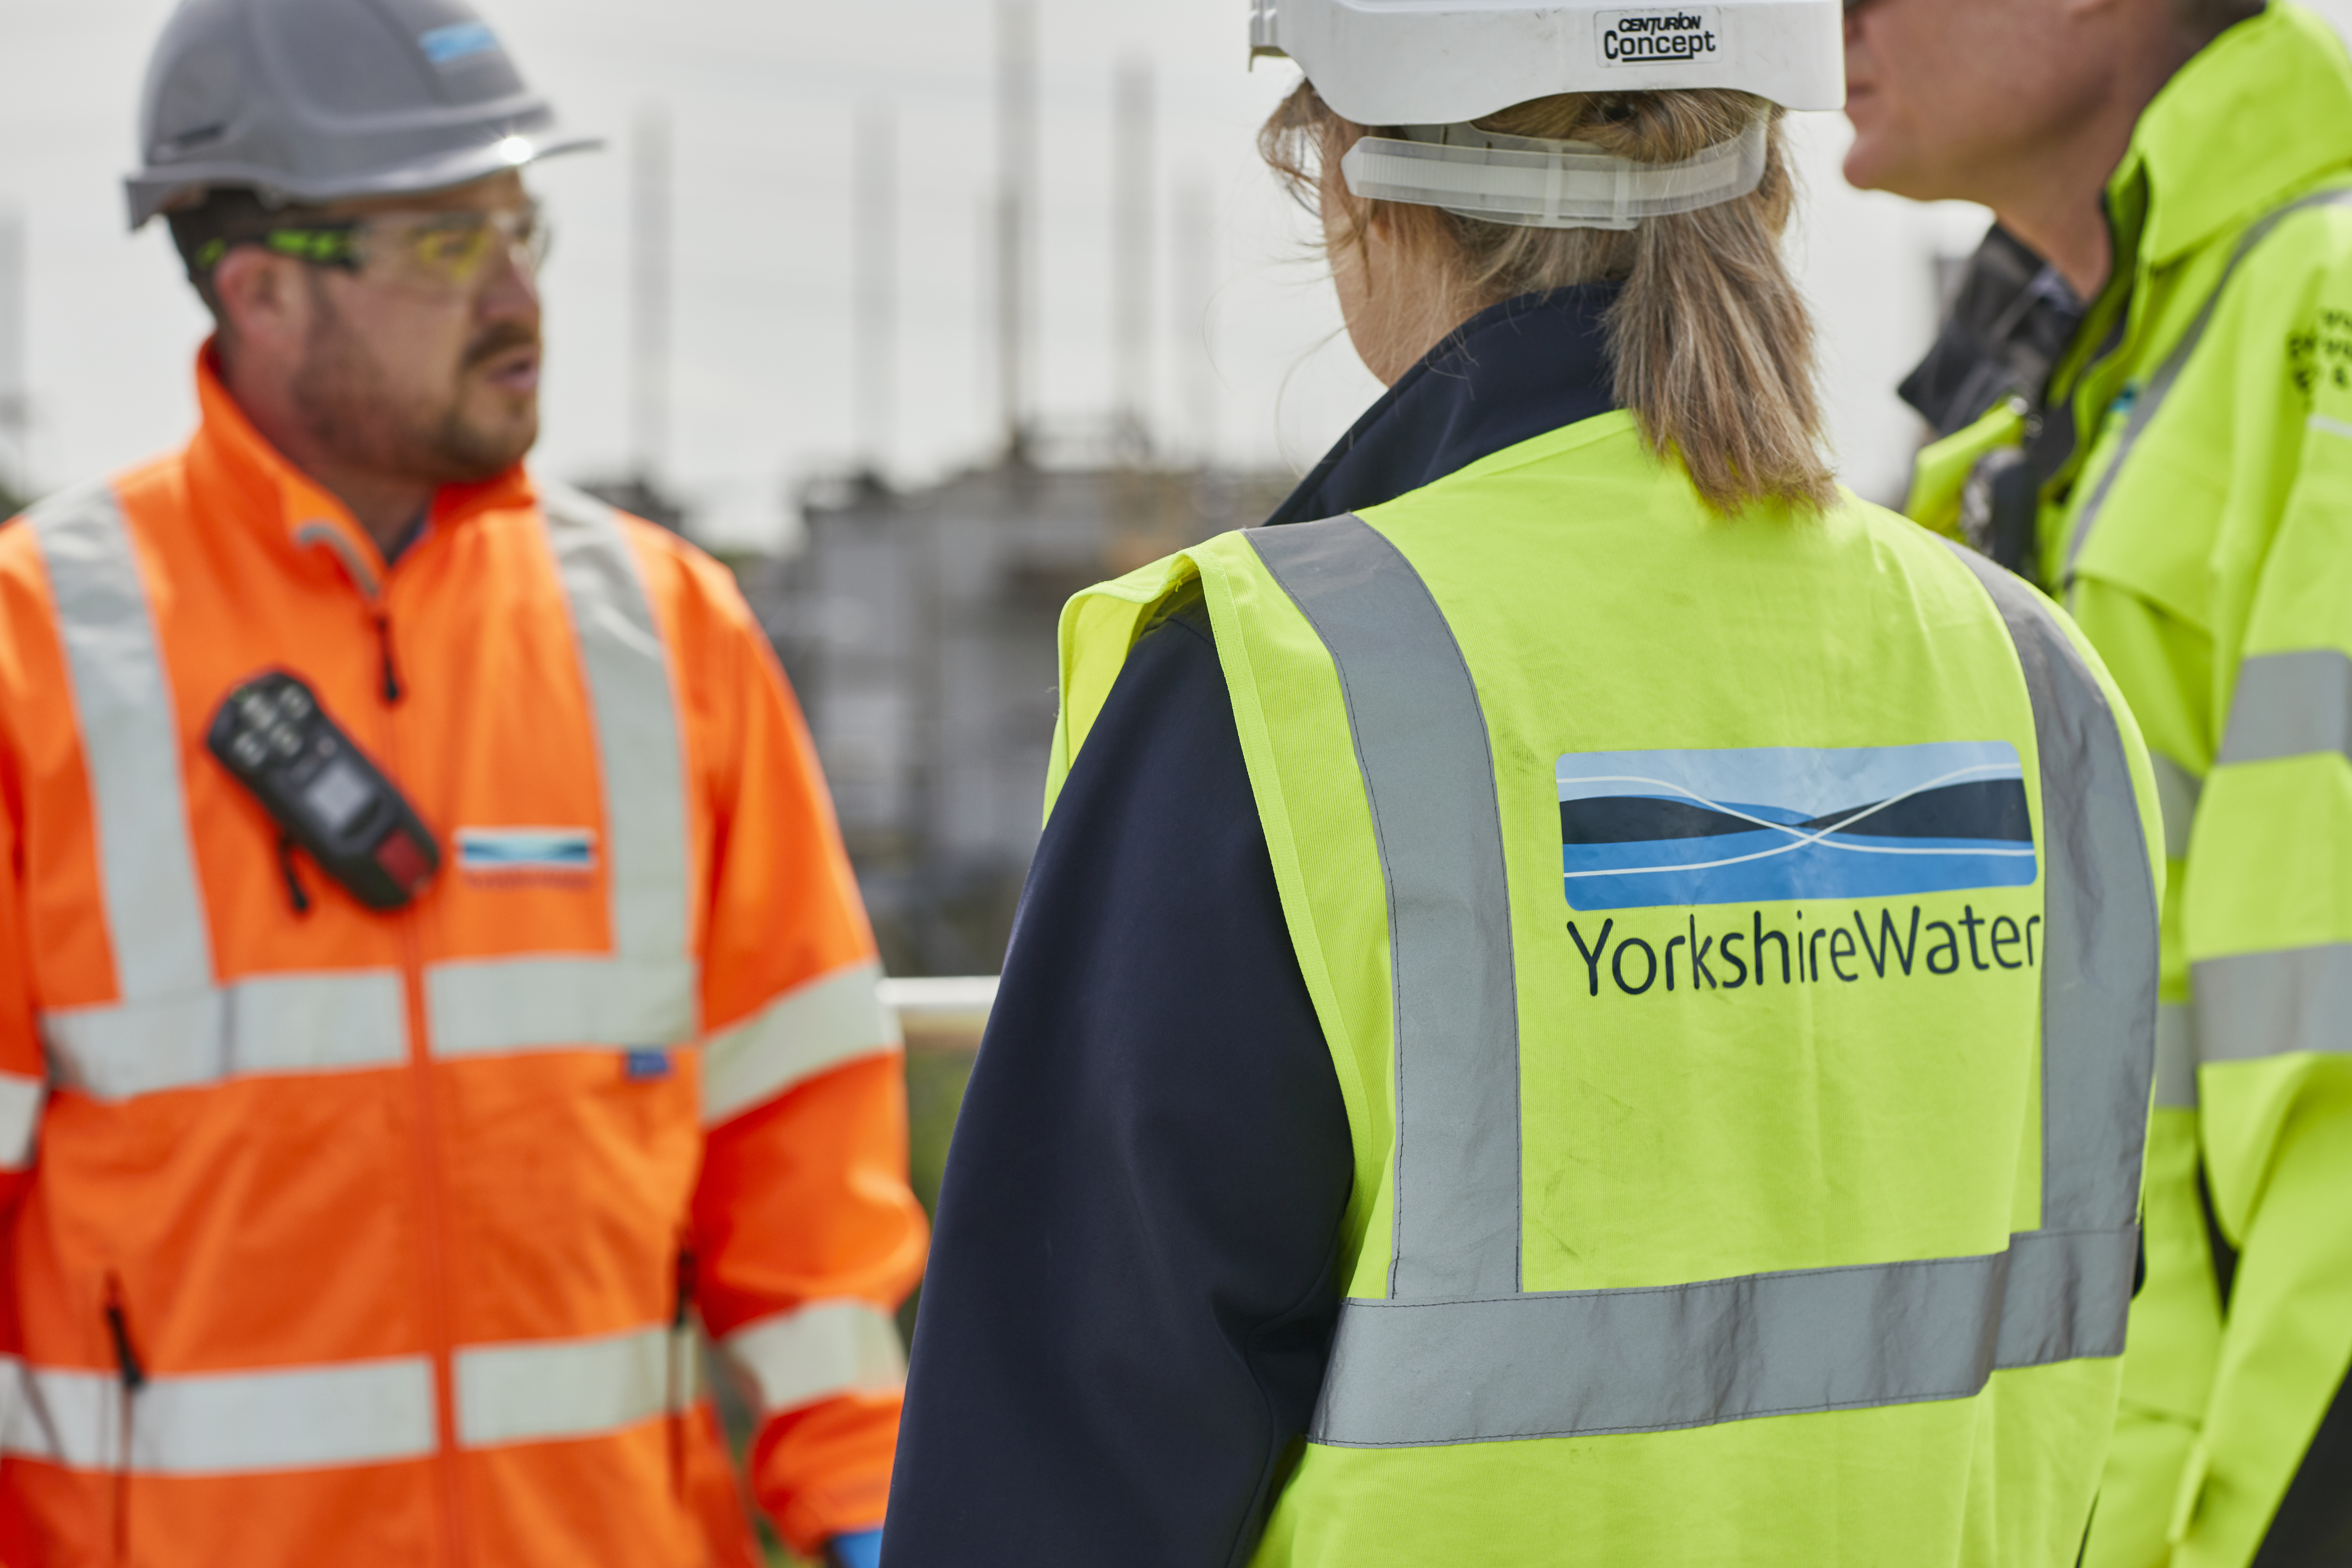 Three Yorkshire Water colleagues wearing high visibility jackets and helmets at a wastewater treatment works